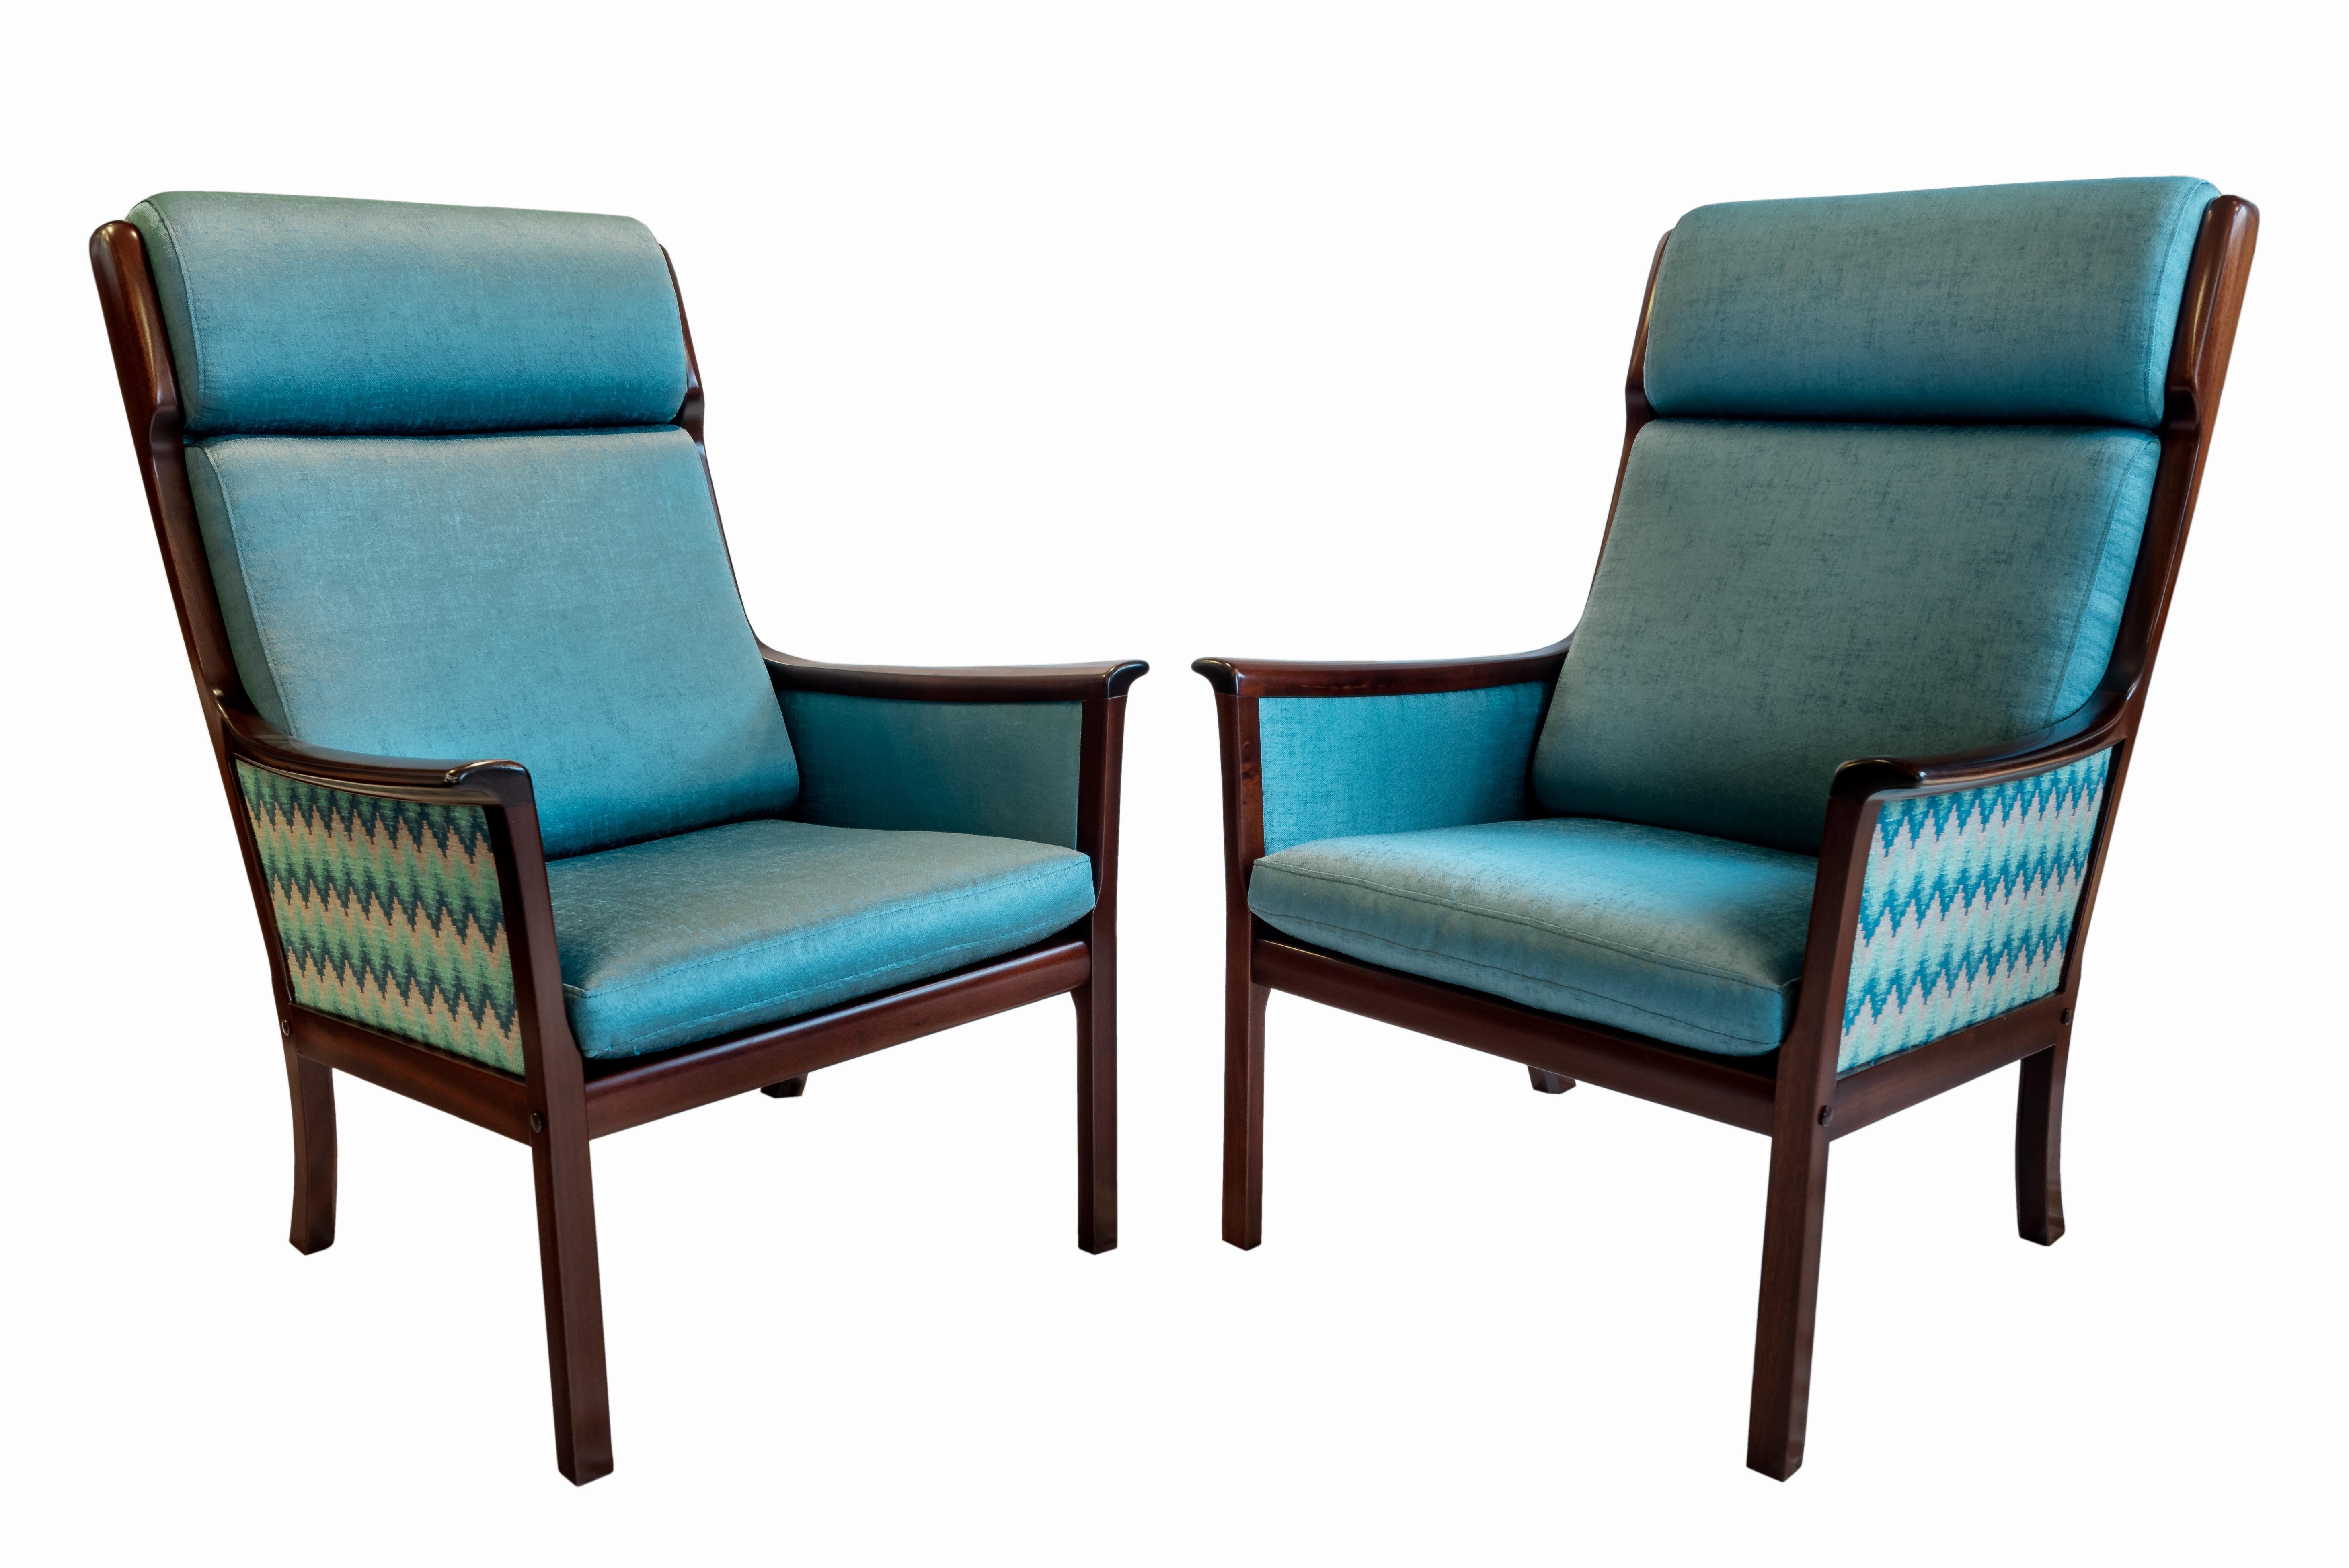 Mid-20th Century Pair of Midcentury Rosewood Highback Easy Chairs by Ole Wanscher for P.Jeppesen